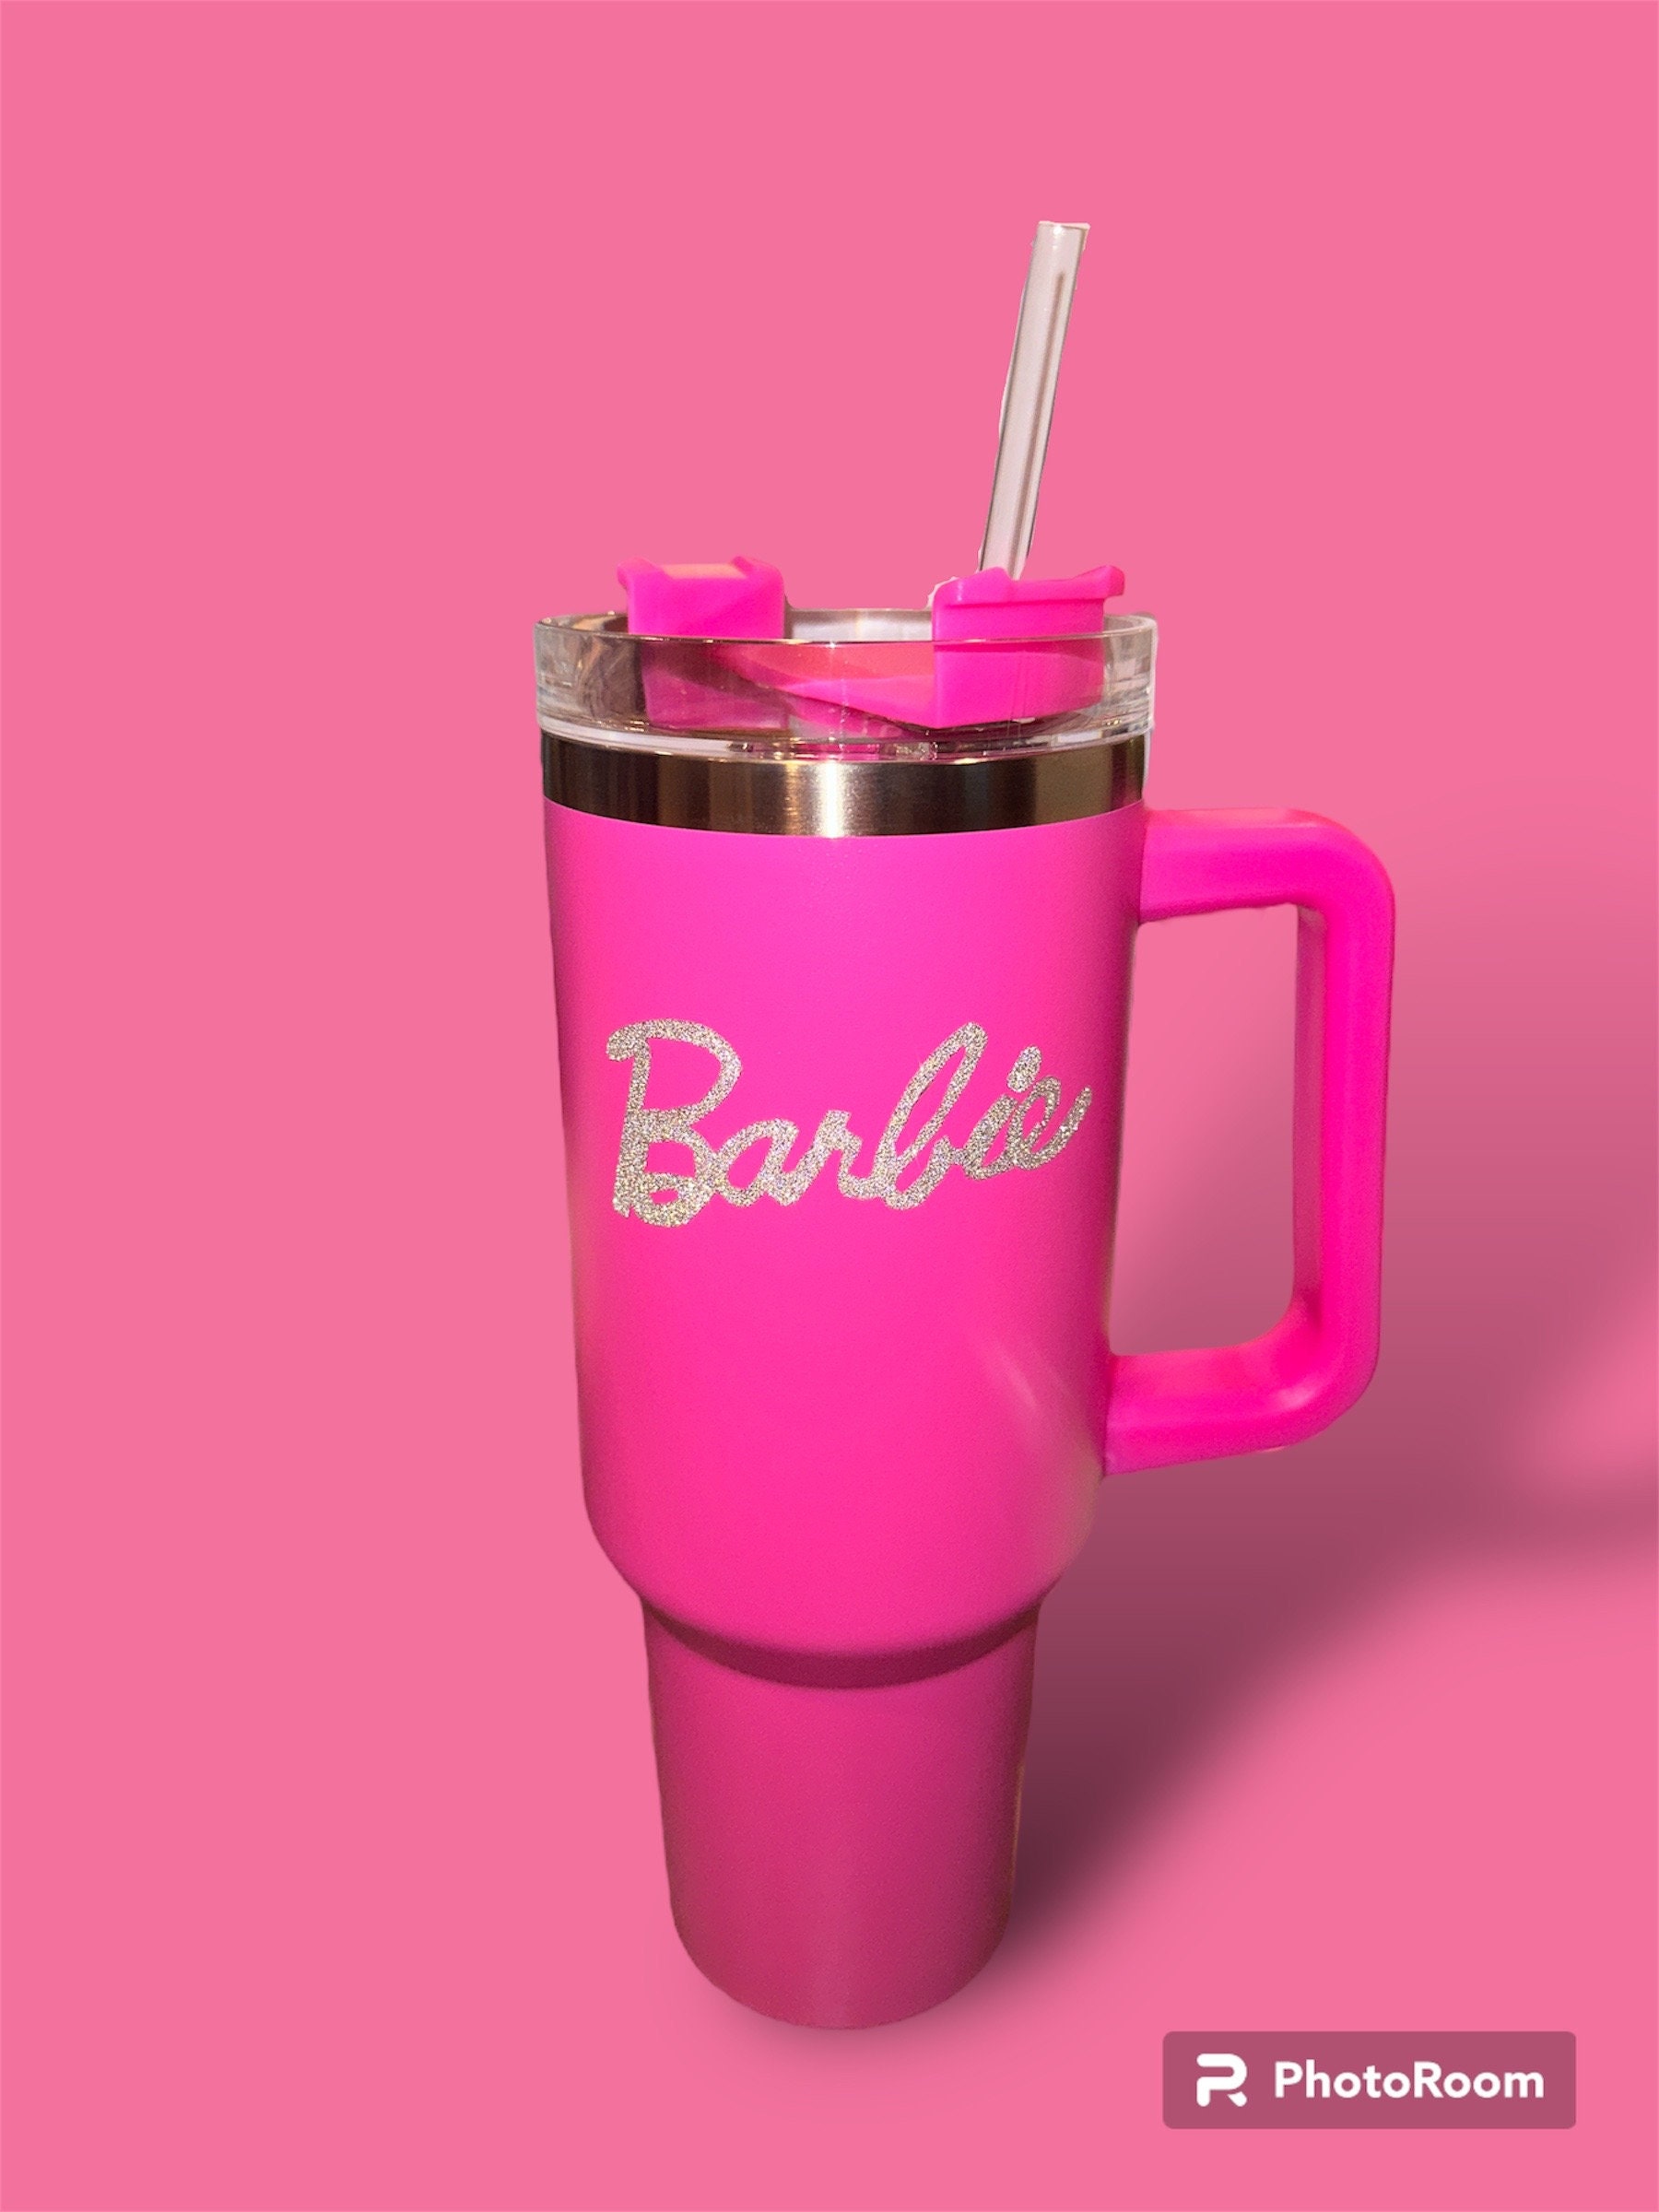 Basically like if barbie were a stanley #stanley #pink #slay, Straw Covers